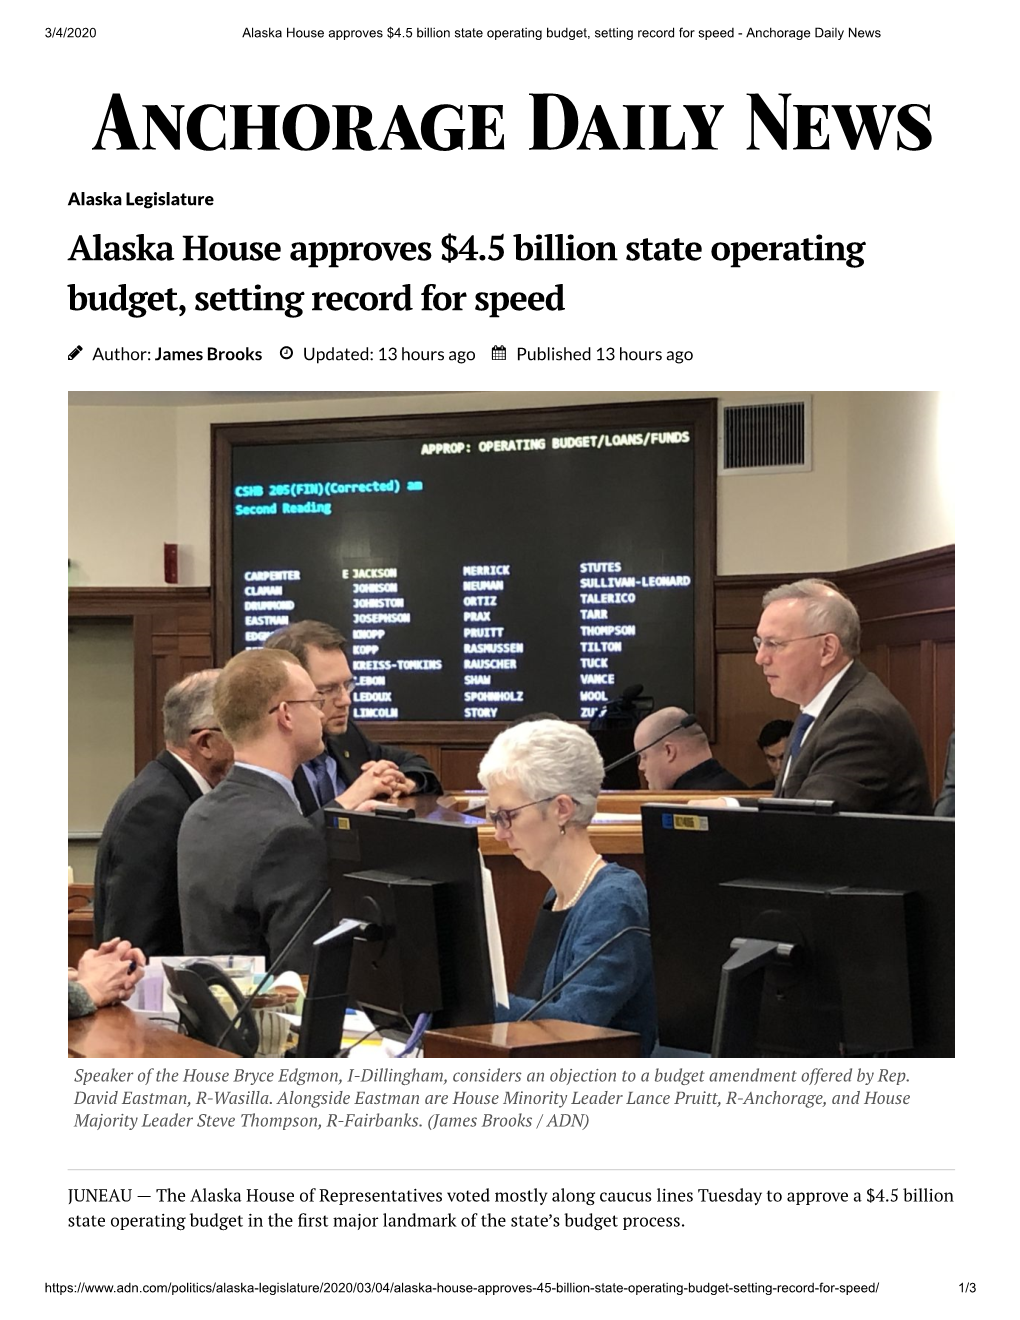 Alaska House Approves $4.5 Billion State Operating Budget, Setting Record for Speed - Anchorage Daily News